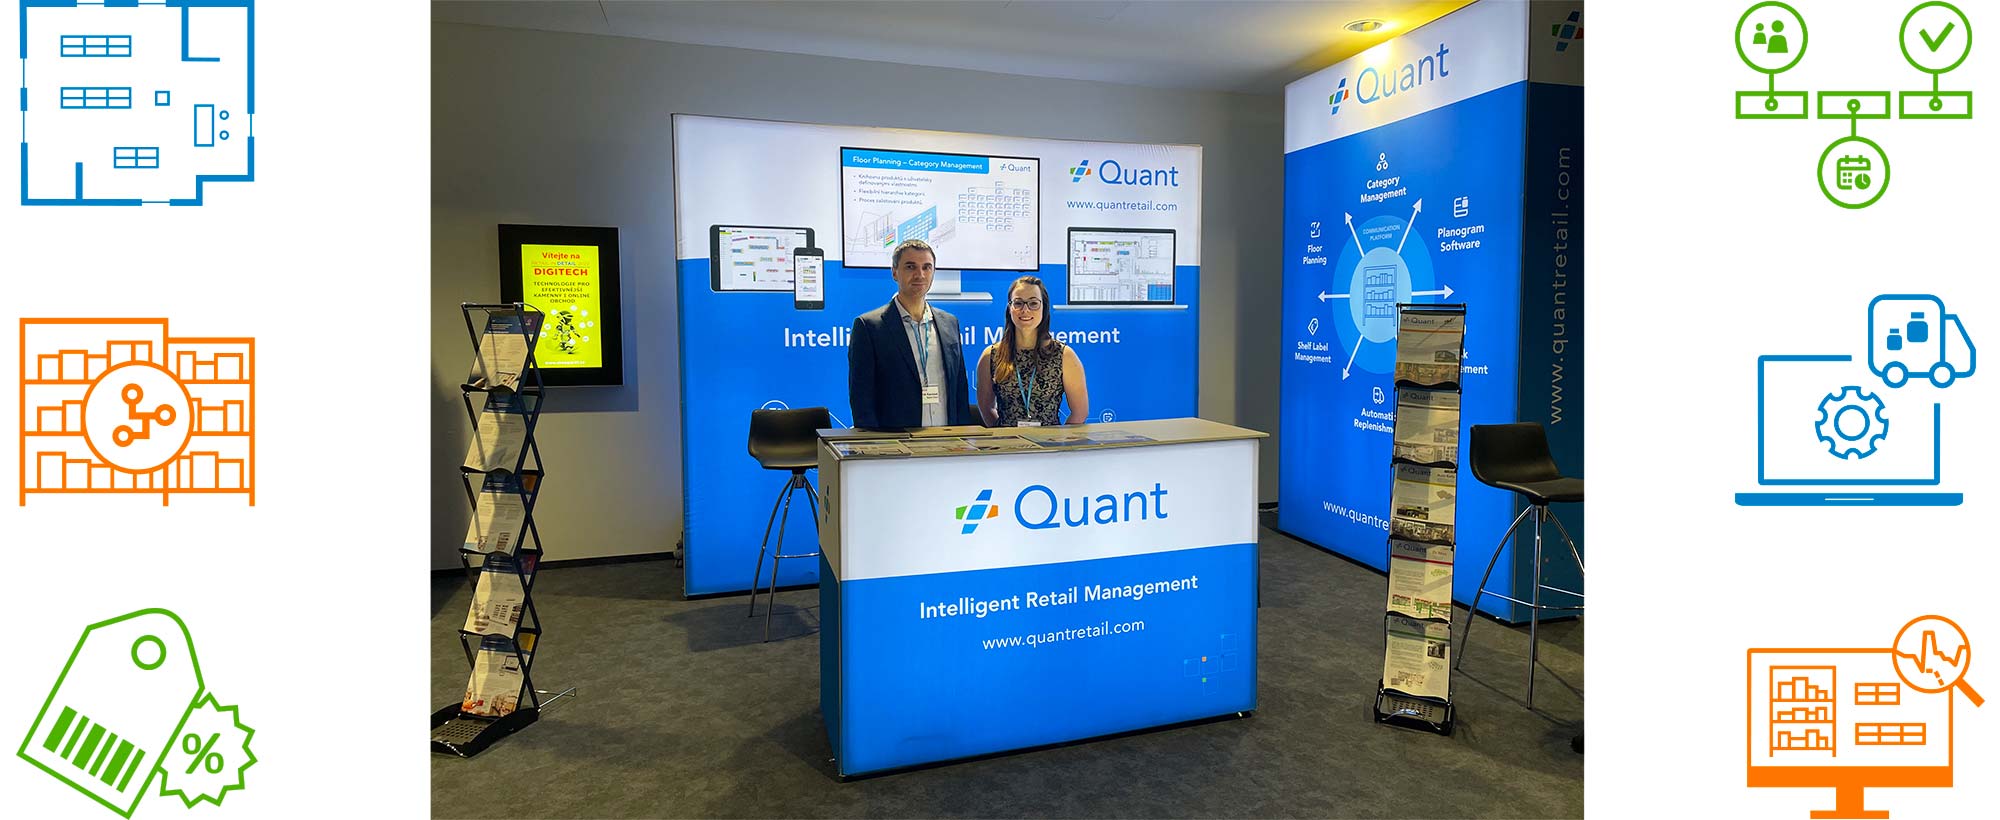 Quant stand at the conference